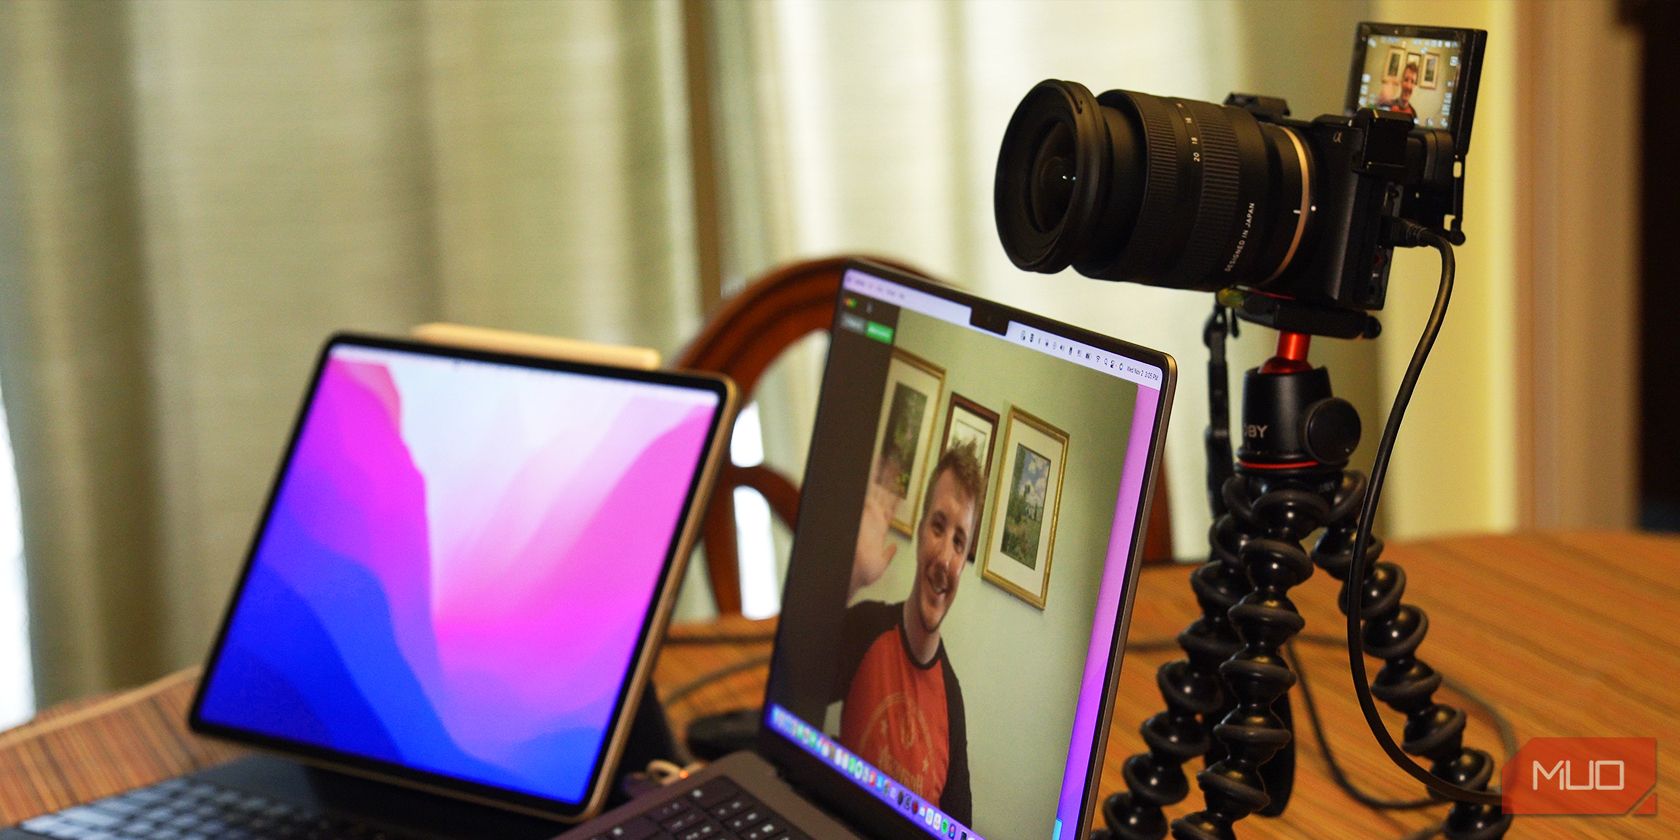 DSLR being used as a webcam on a MacBook Pro